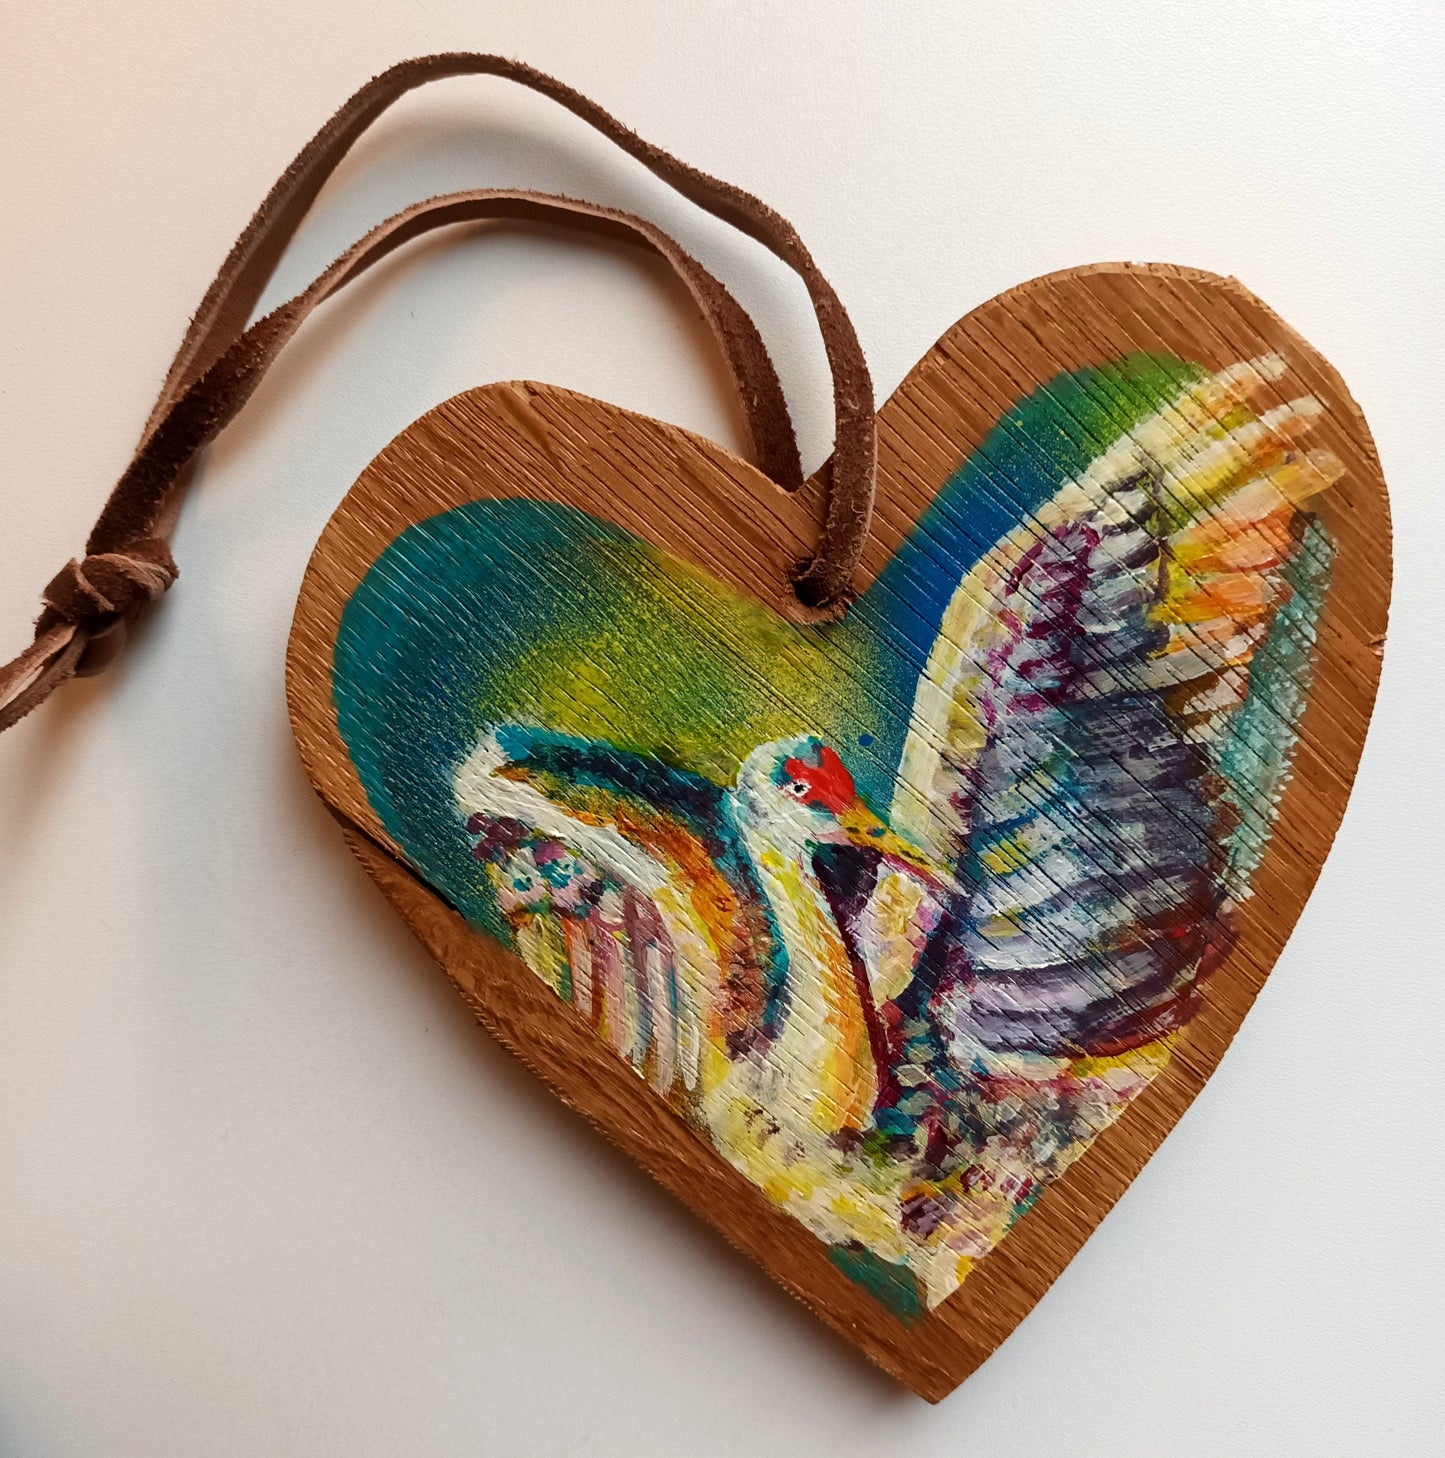 "Balanced path" Painting on a wooden heart